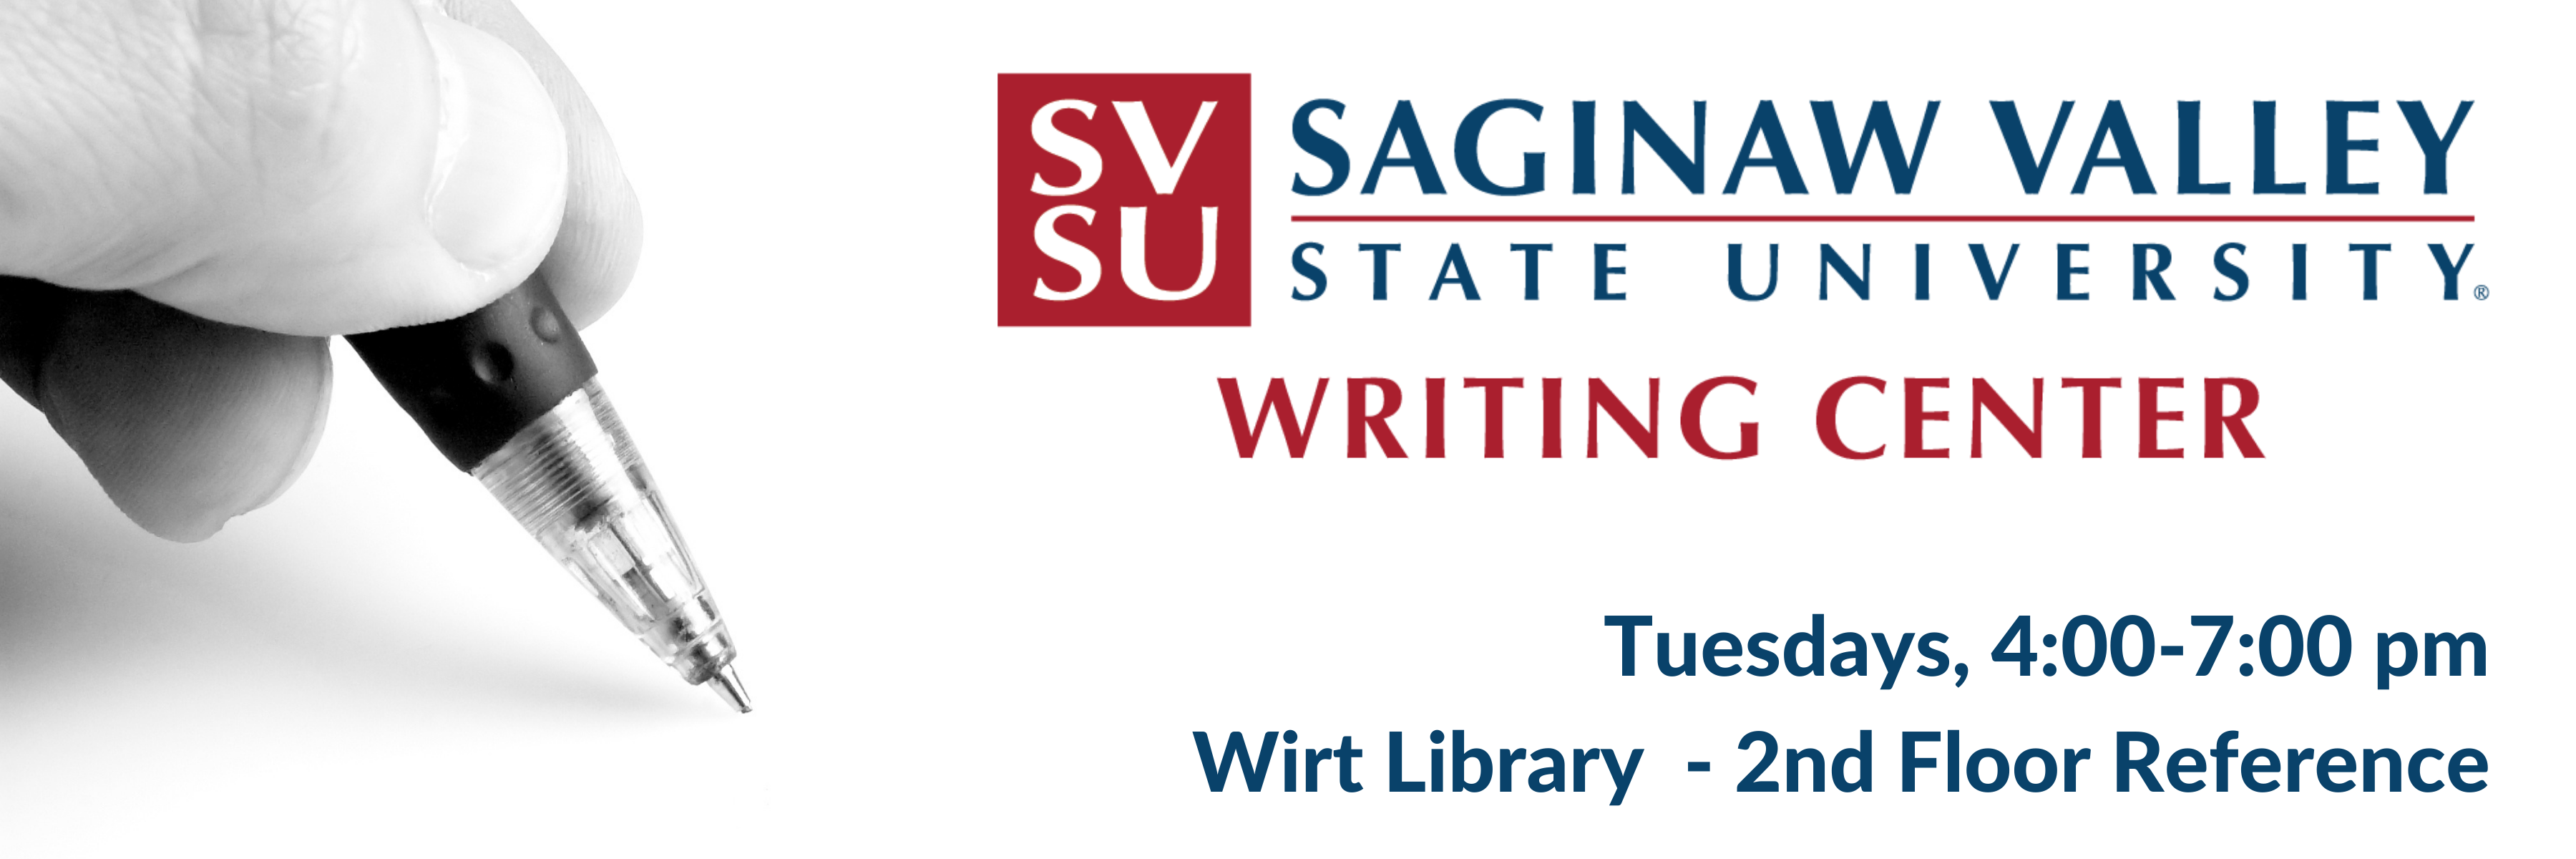 Writing Center is open Tuesdays 4:00 to 7:00 pm at Wirt Library